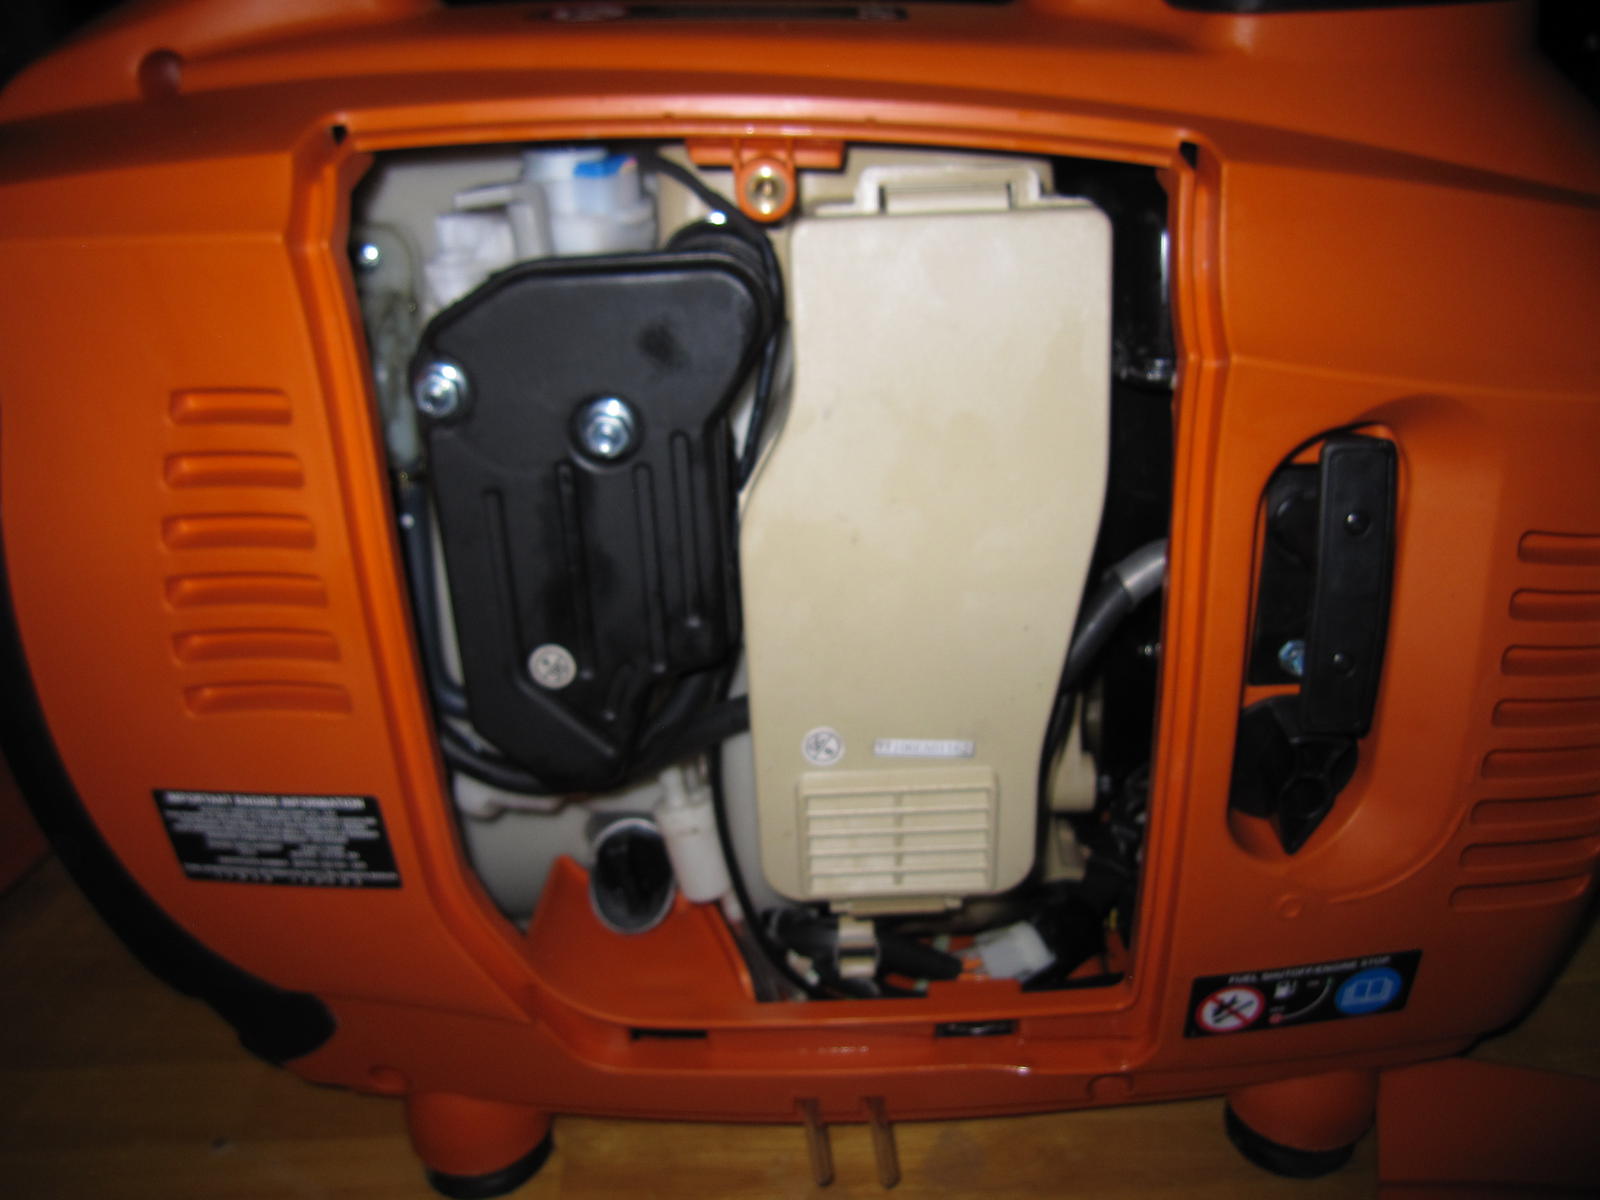 Generac IX2000 review - it's junk - with video